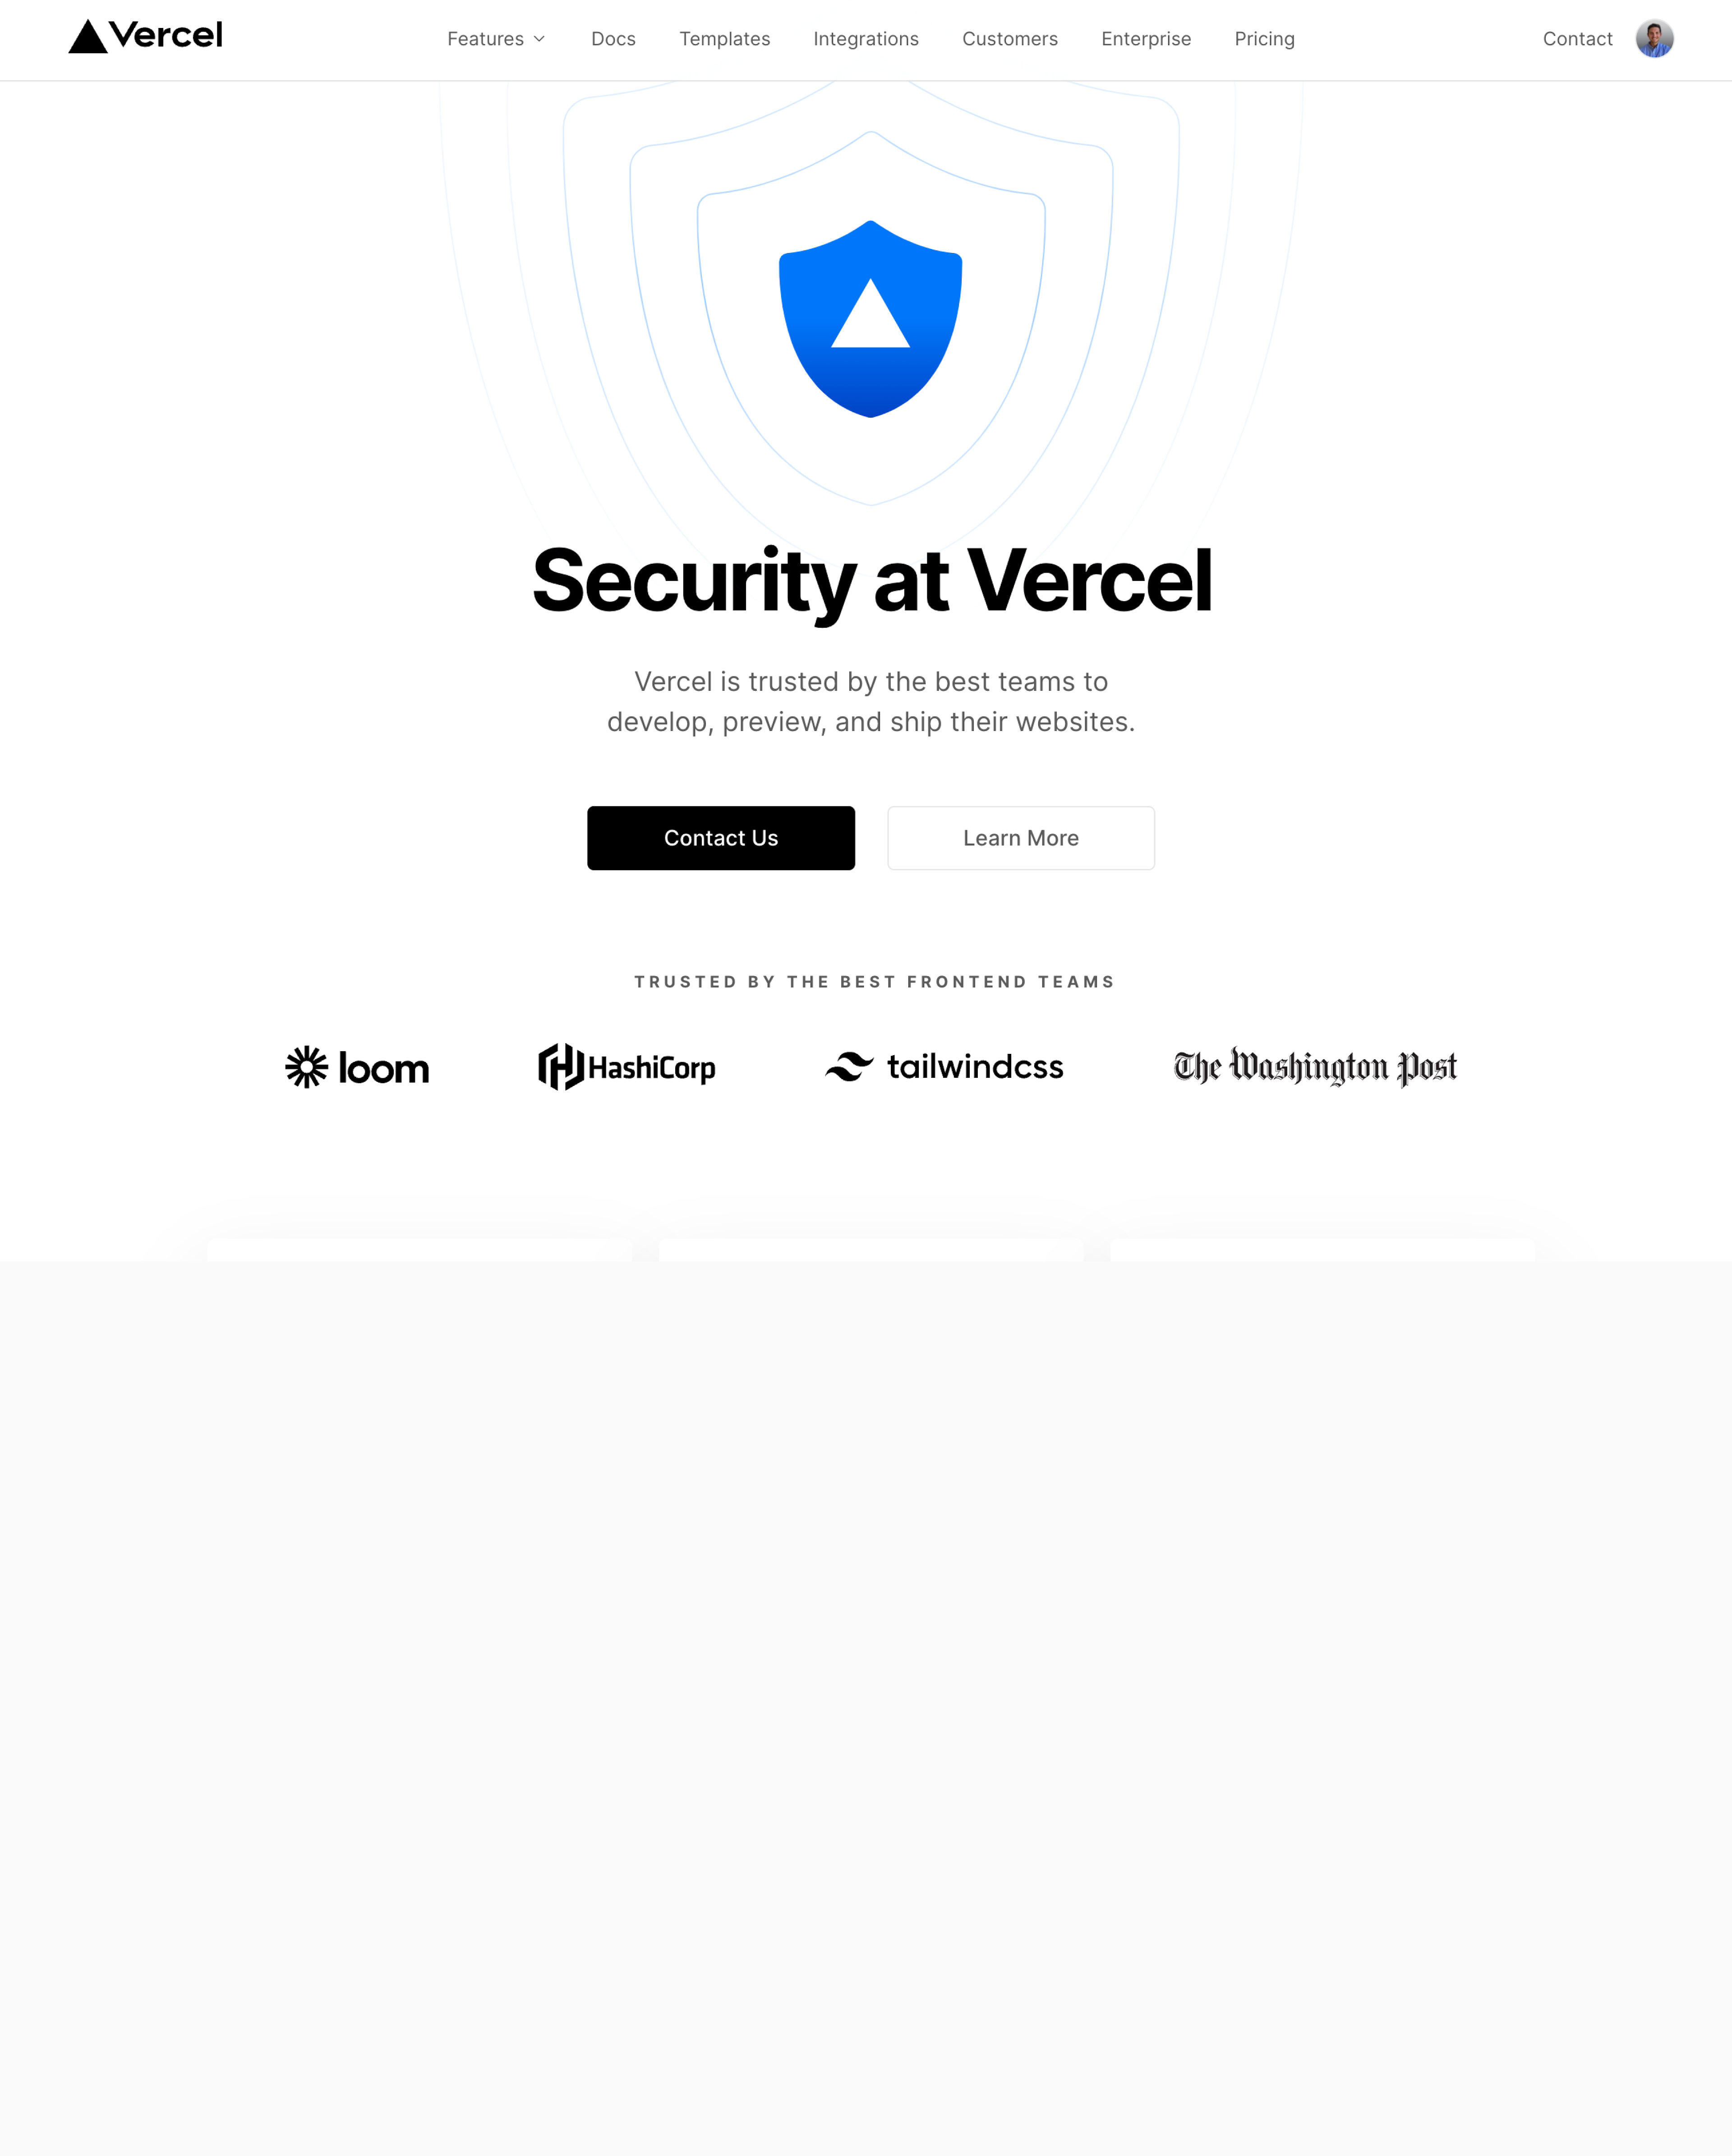 Vercel's investment in a secure web